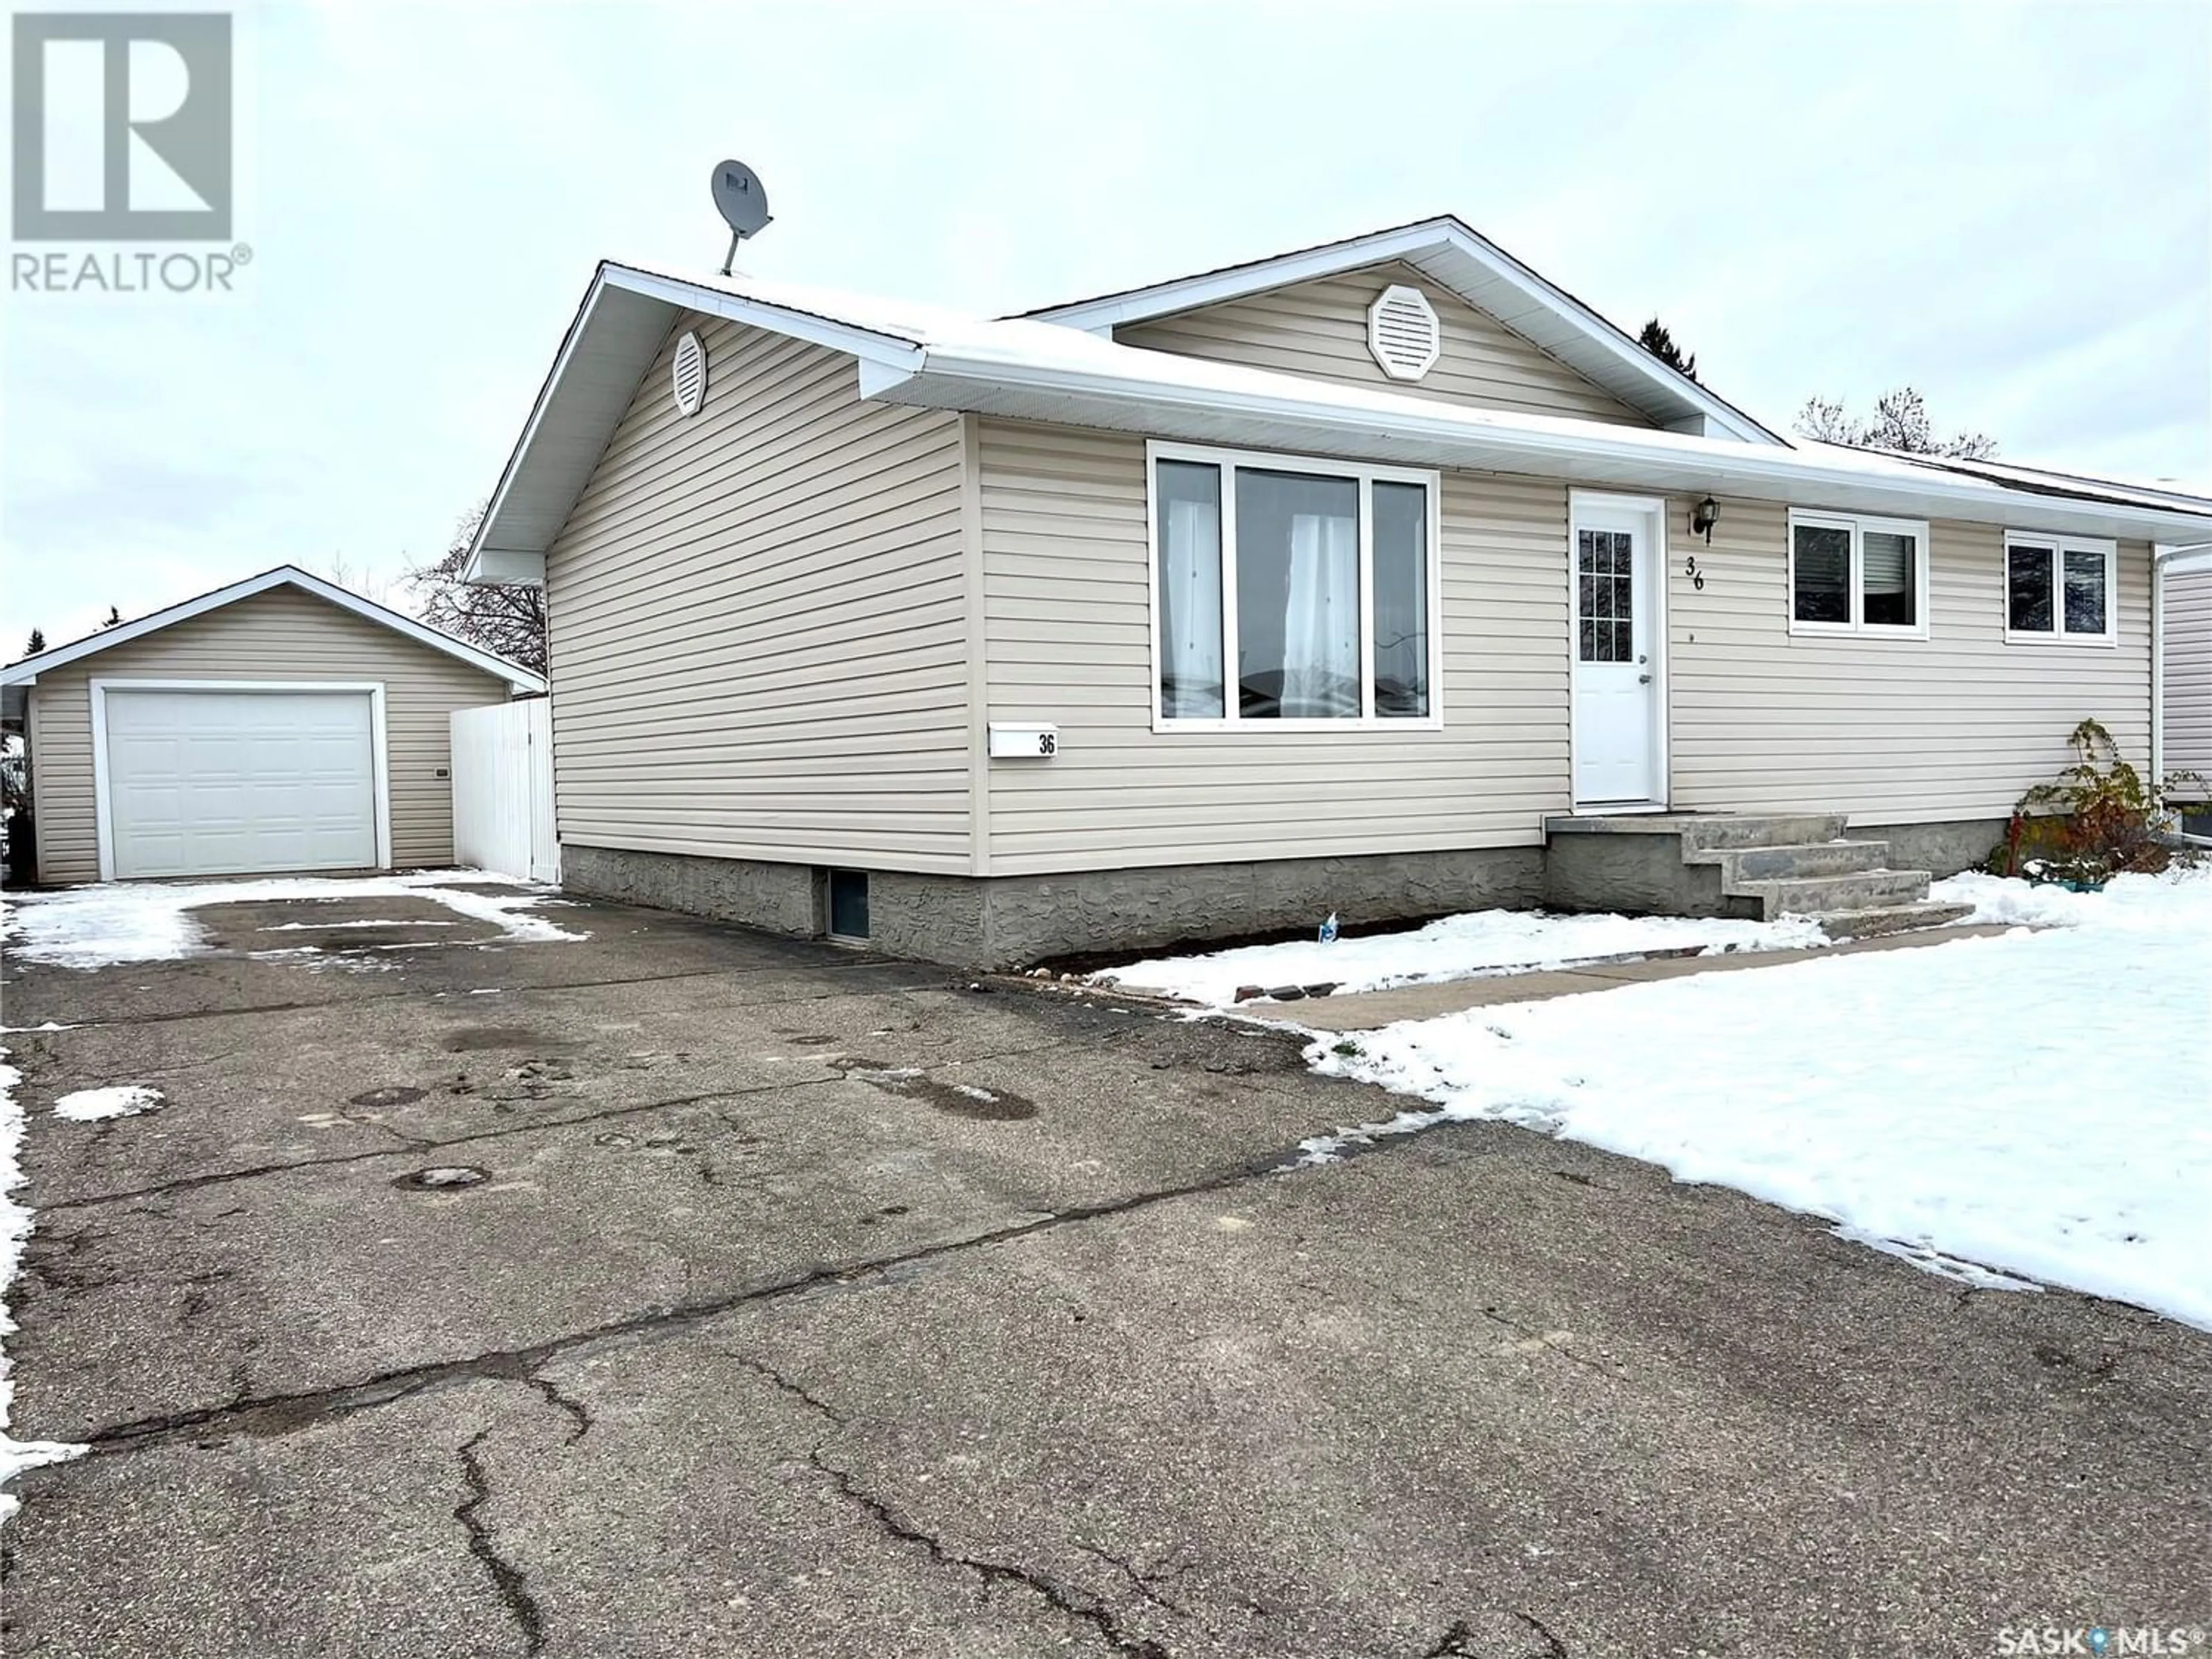 Home with unknown exterior material for 36 Centennial CRESCENT, Melville Saskatchewan S0A2P0